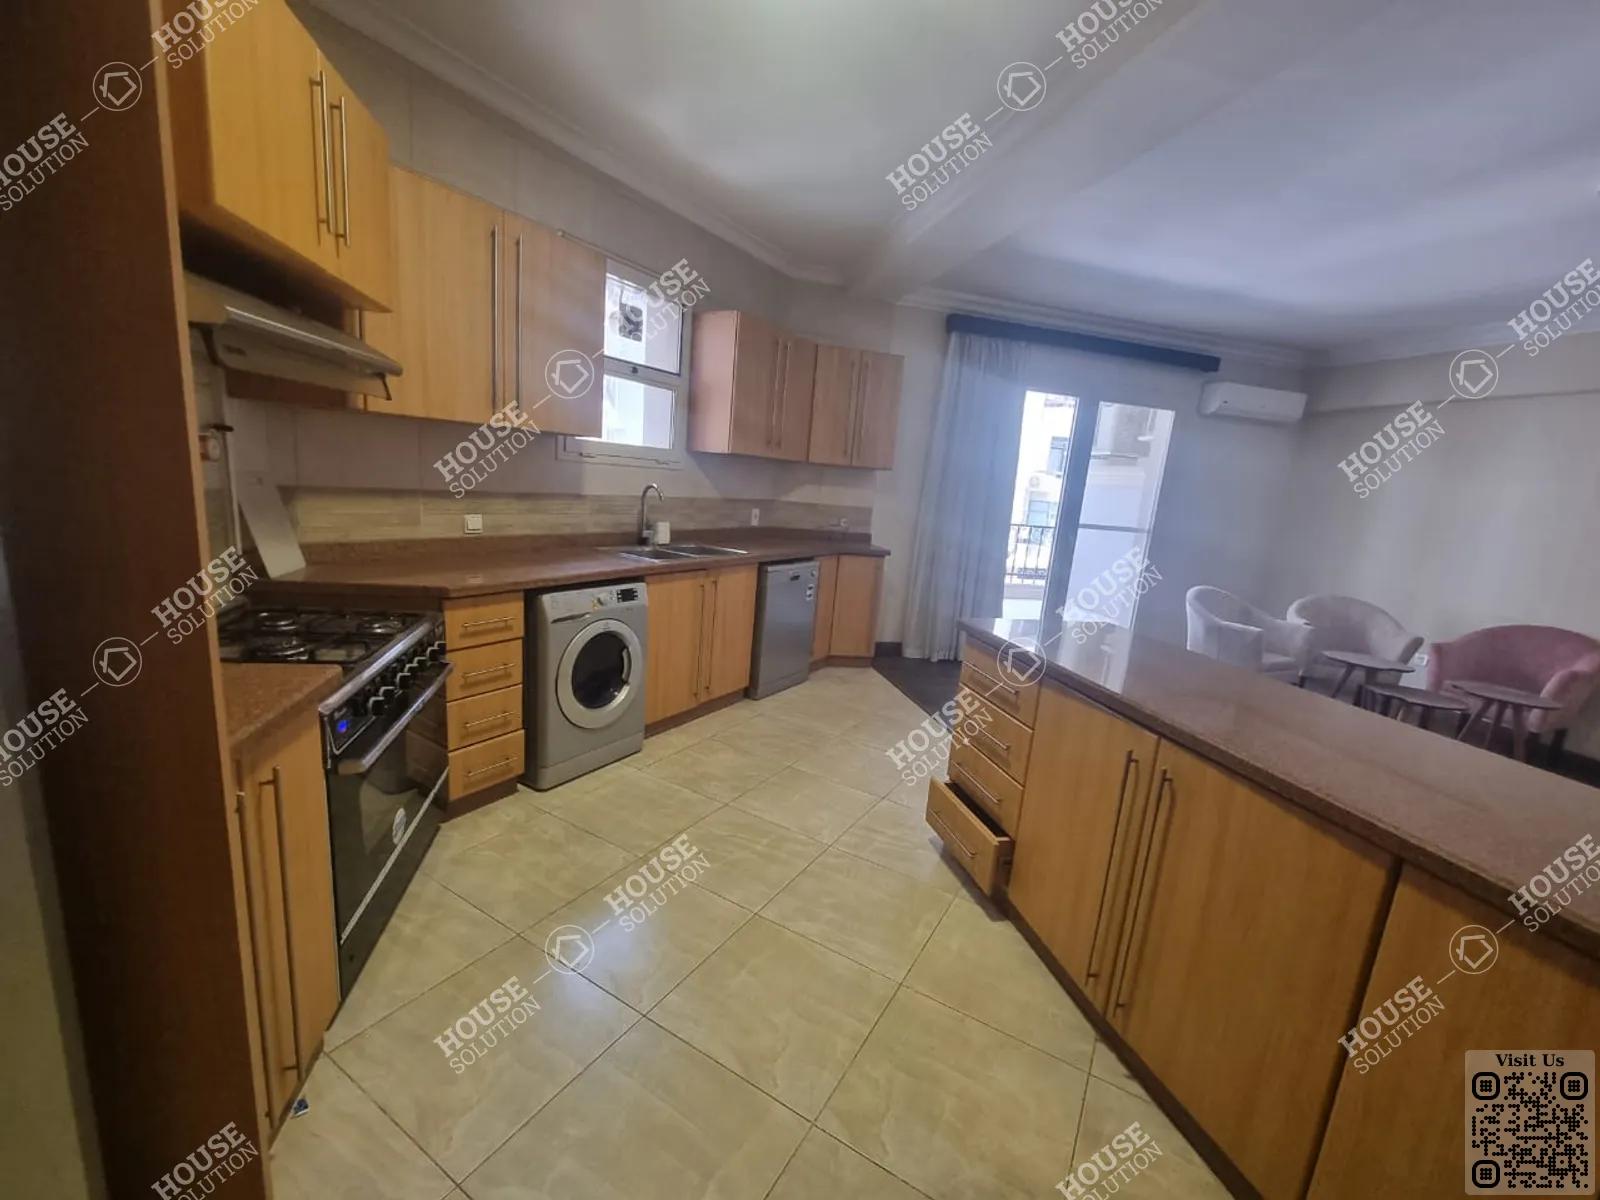 KITCHEN  @ Apartments For Rent In Maadi Maadi Sarayat Area: 220 m² consists of 3 Bedrooms 3 Bathrooms Modern furnished 5 stars #5674-1